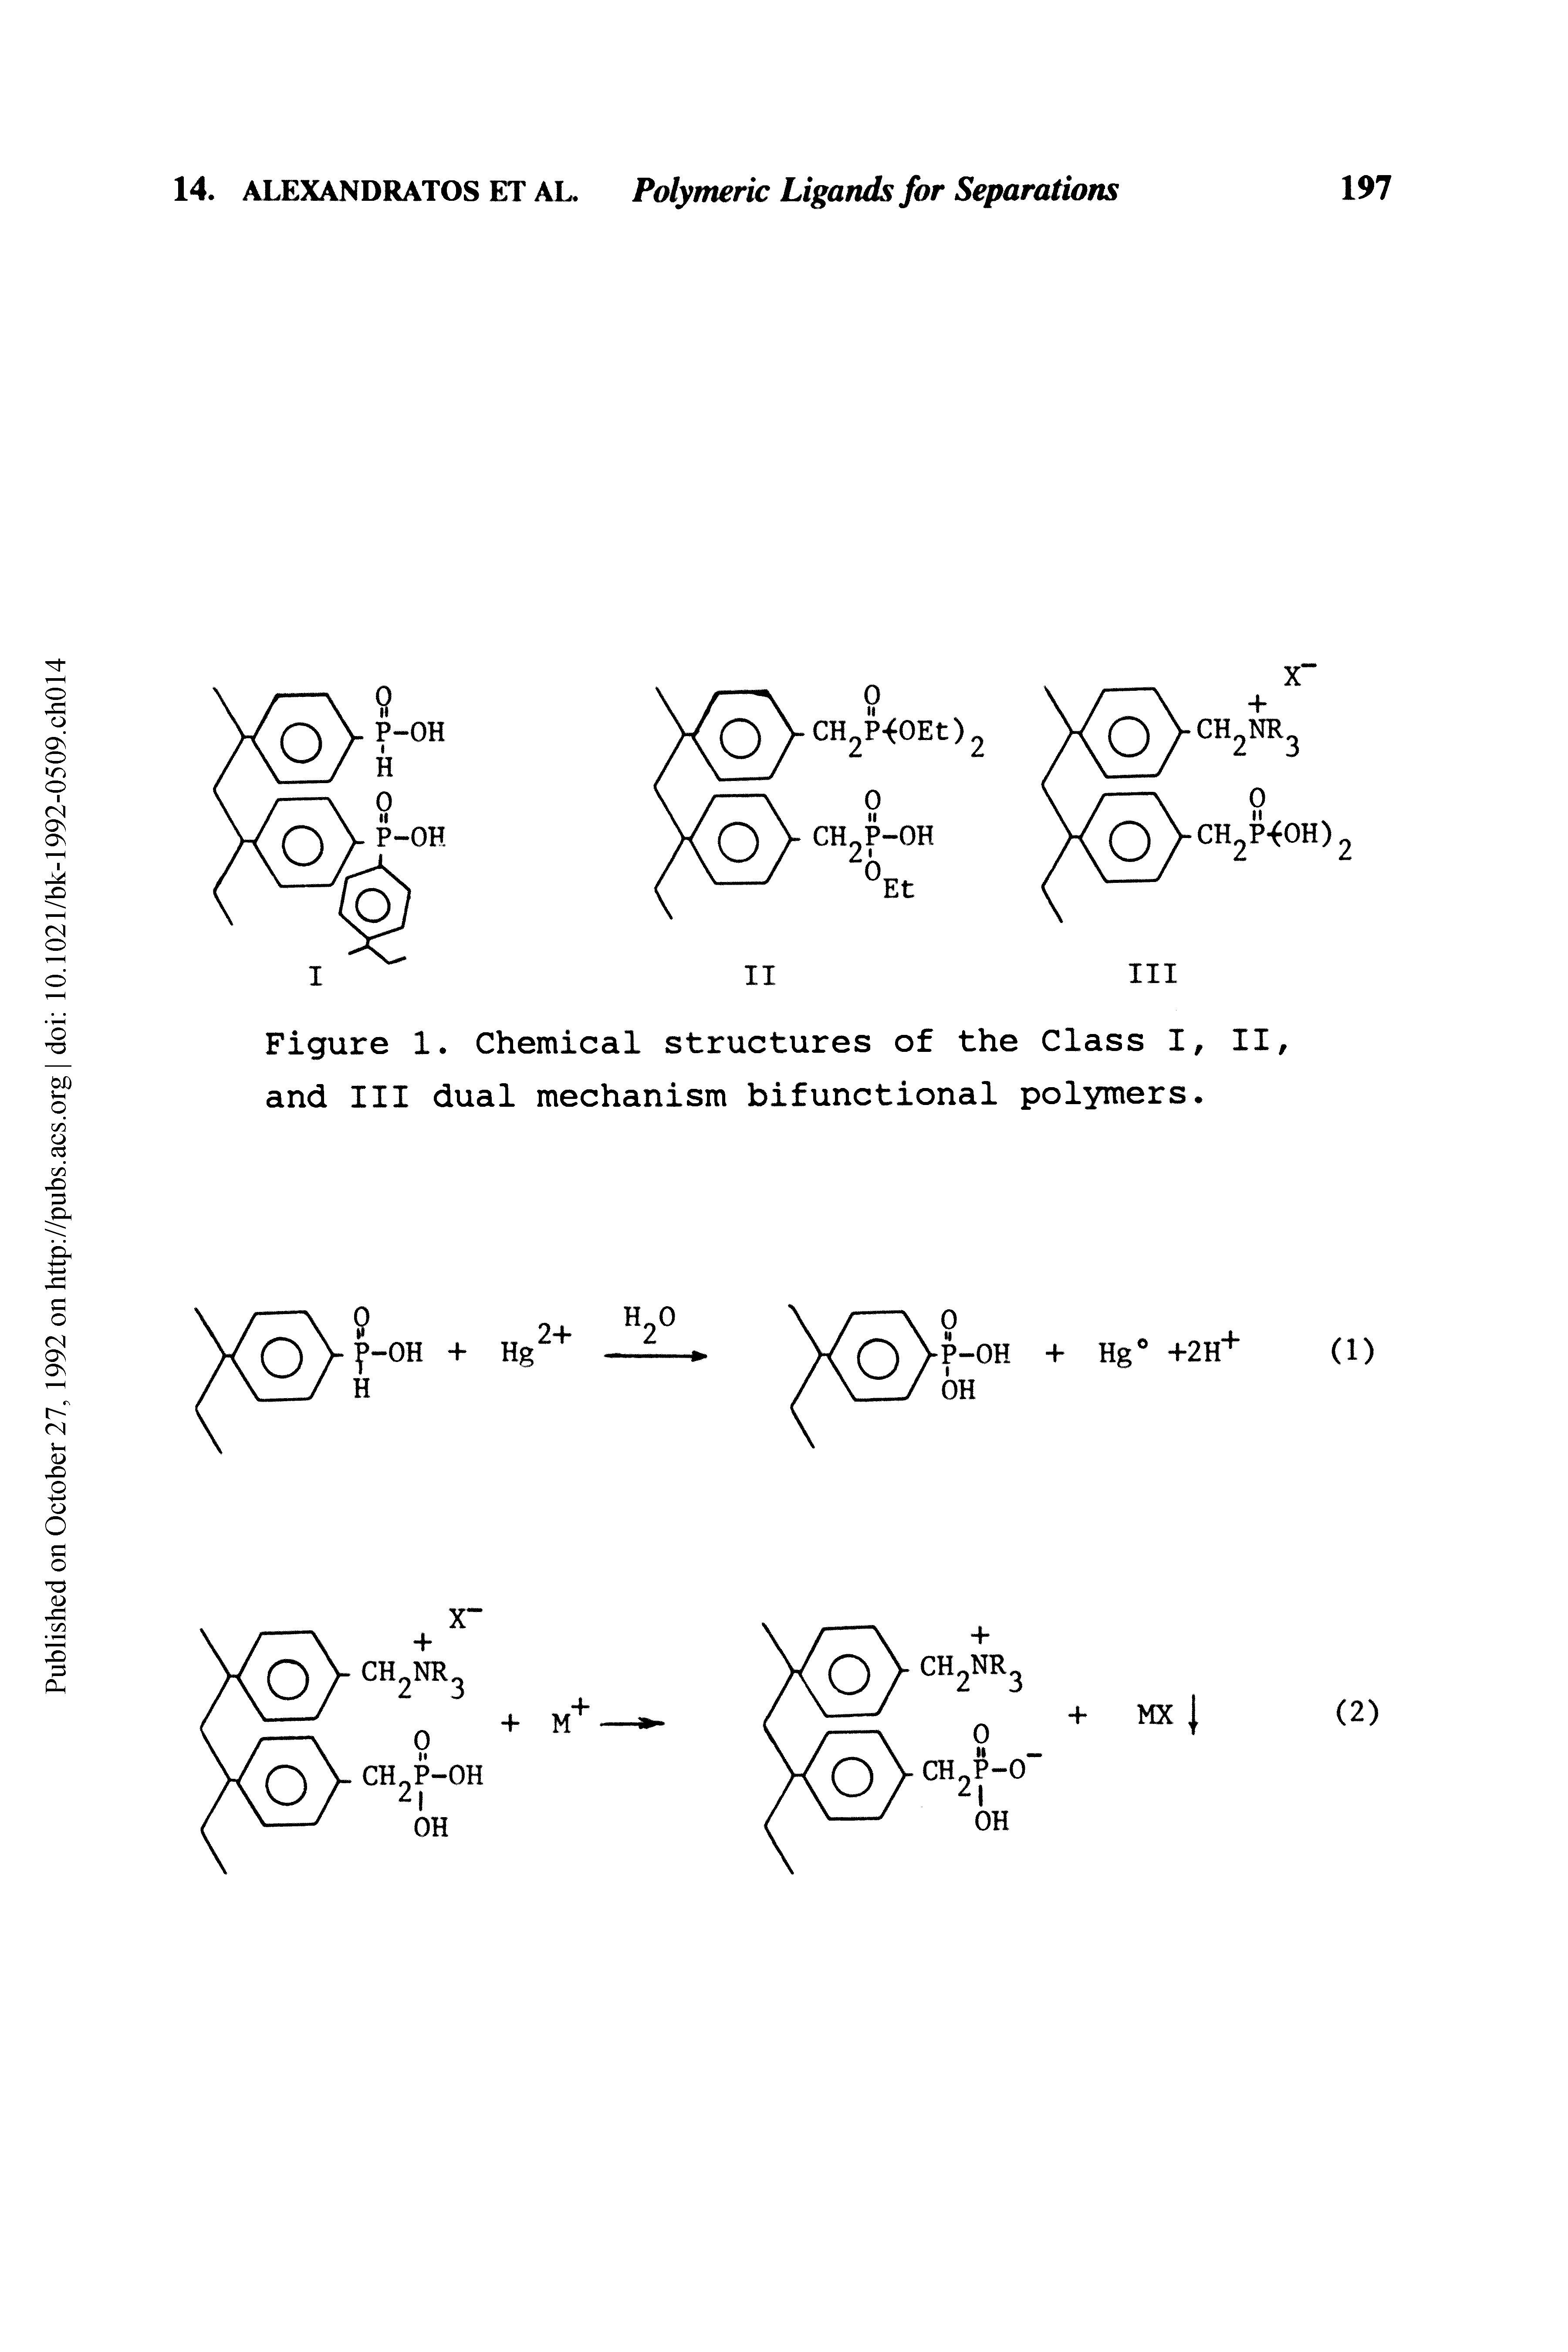 Figure 1. Chemical structures of the Class I, II, and III dual mechanism bifunctional polymers.